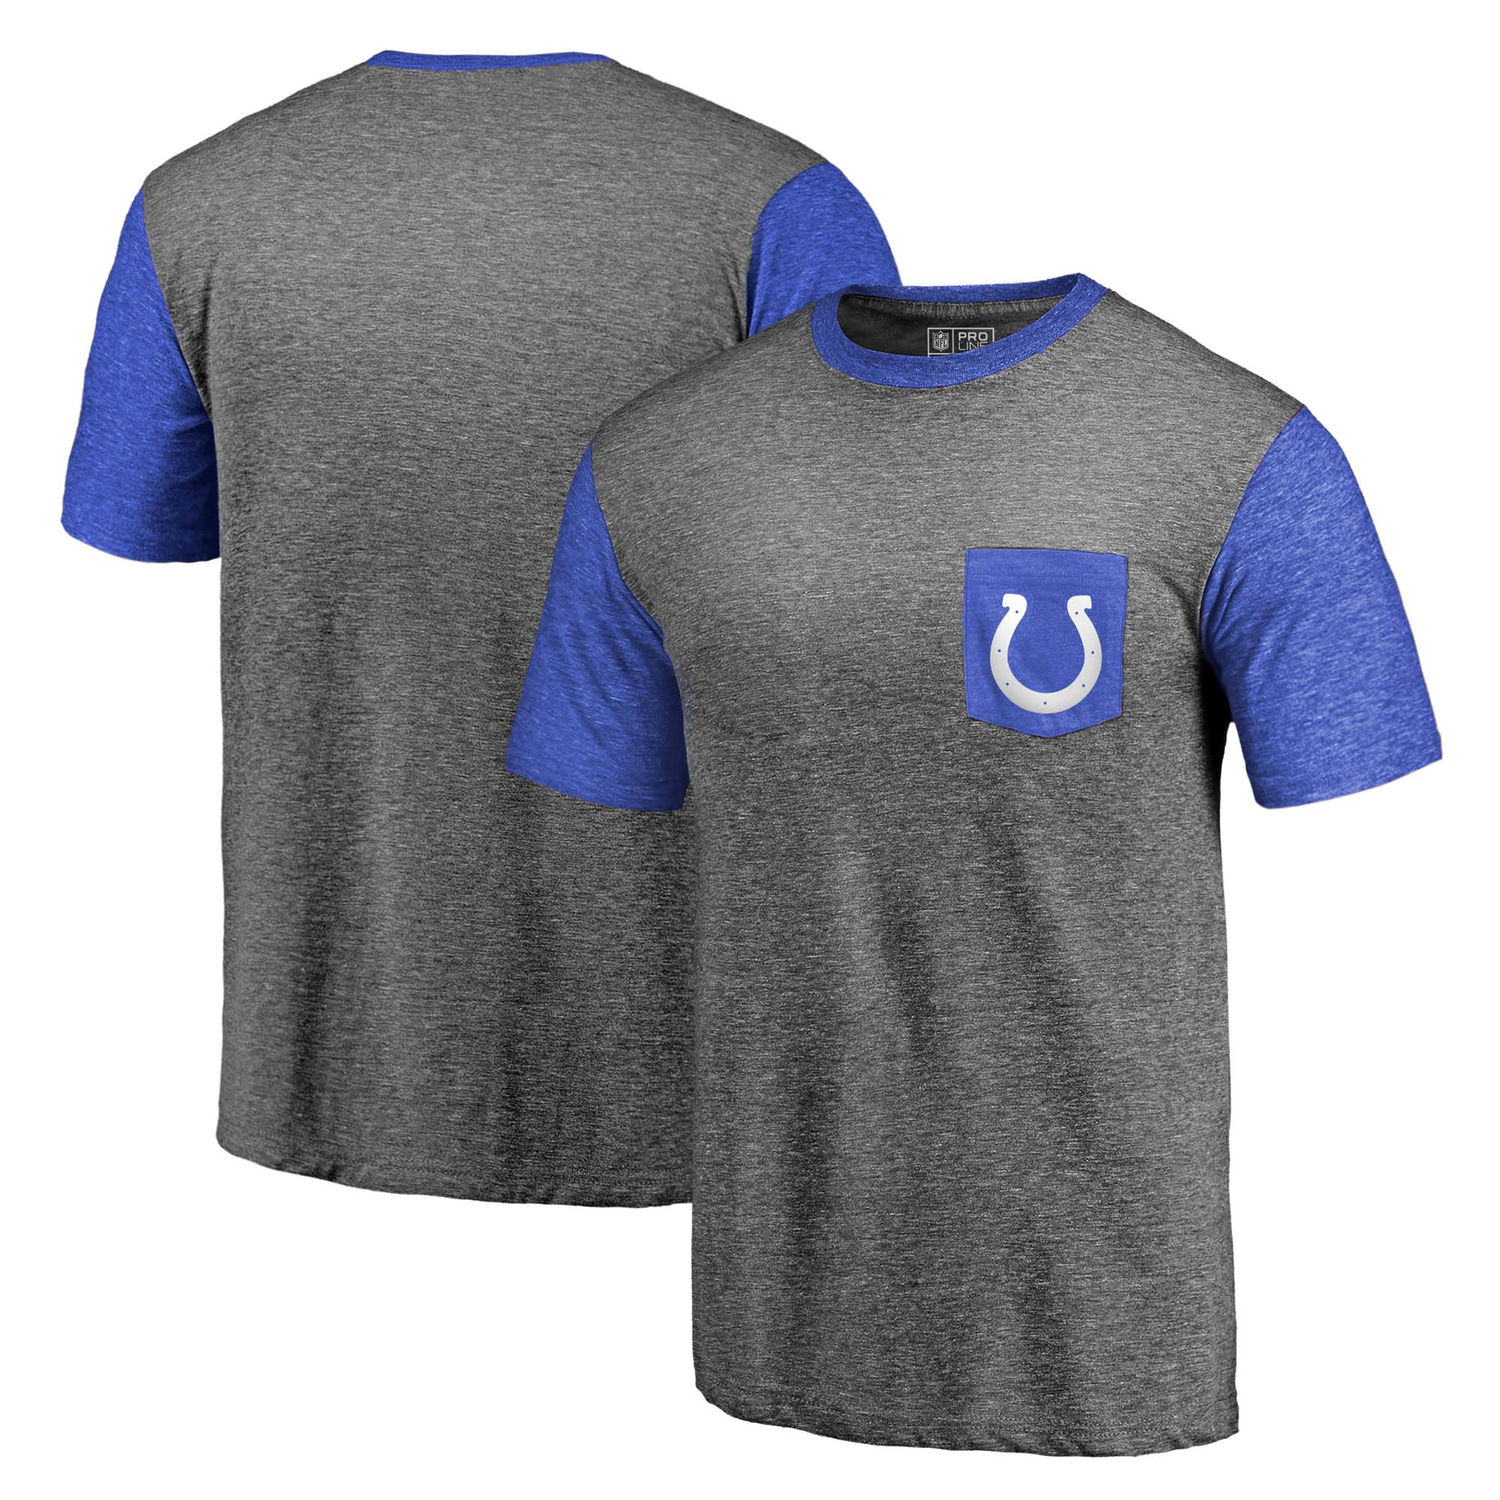 Men's Indianapolis Colts NFL Pro Line by Fanatics Branded Heathered Gray-Royal Refresh Pocket T-Shirt